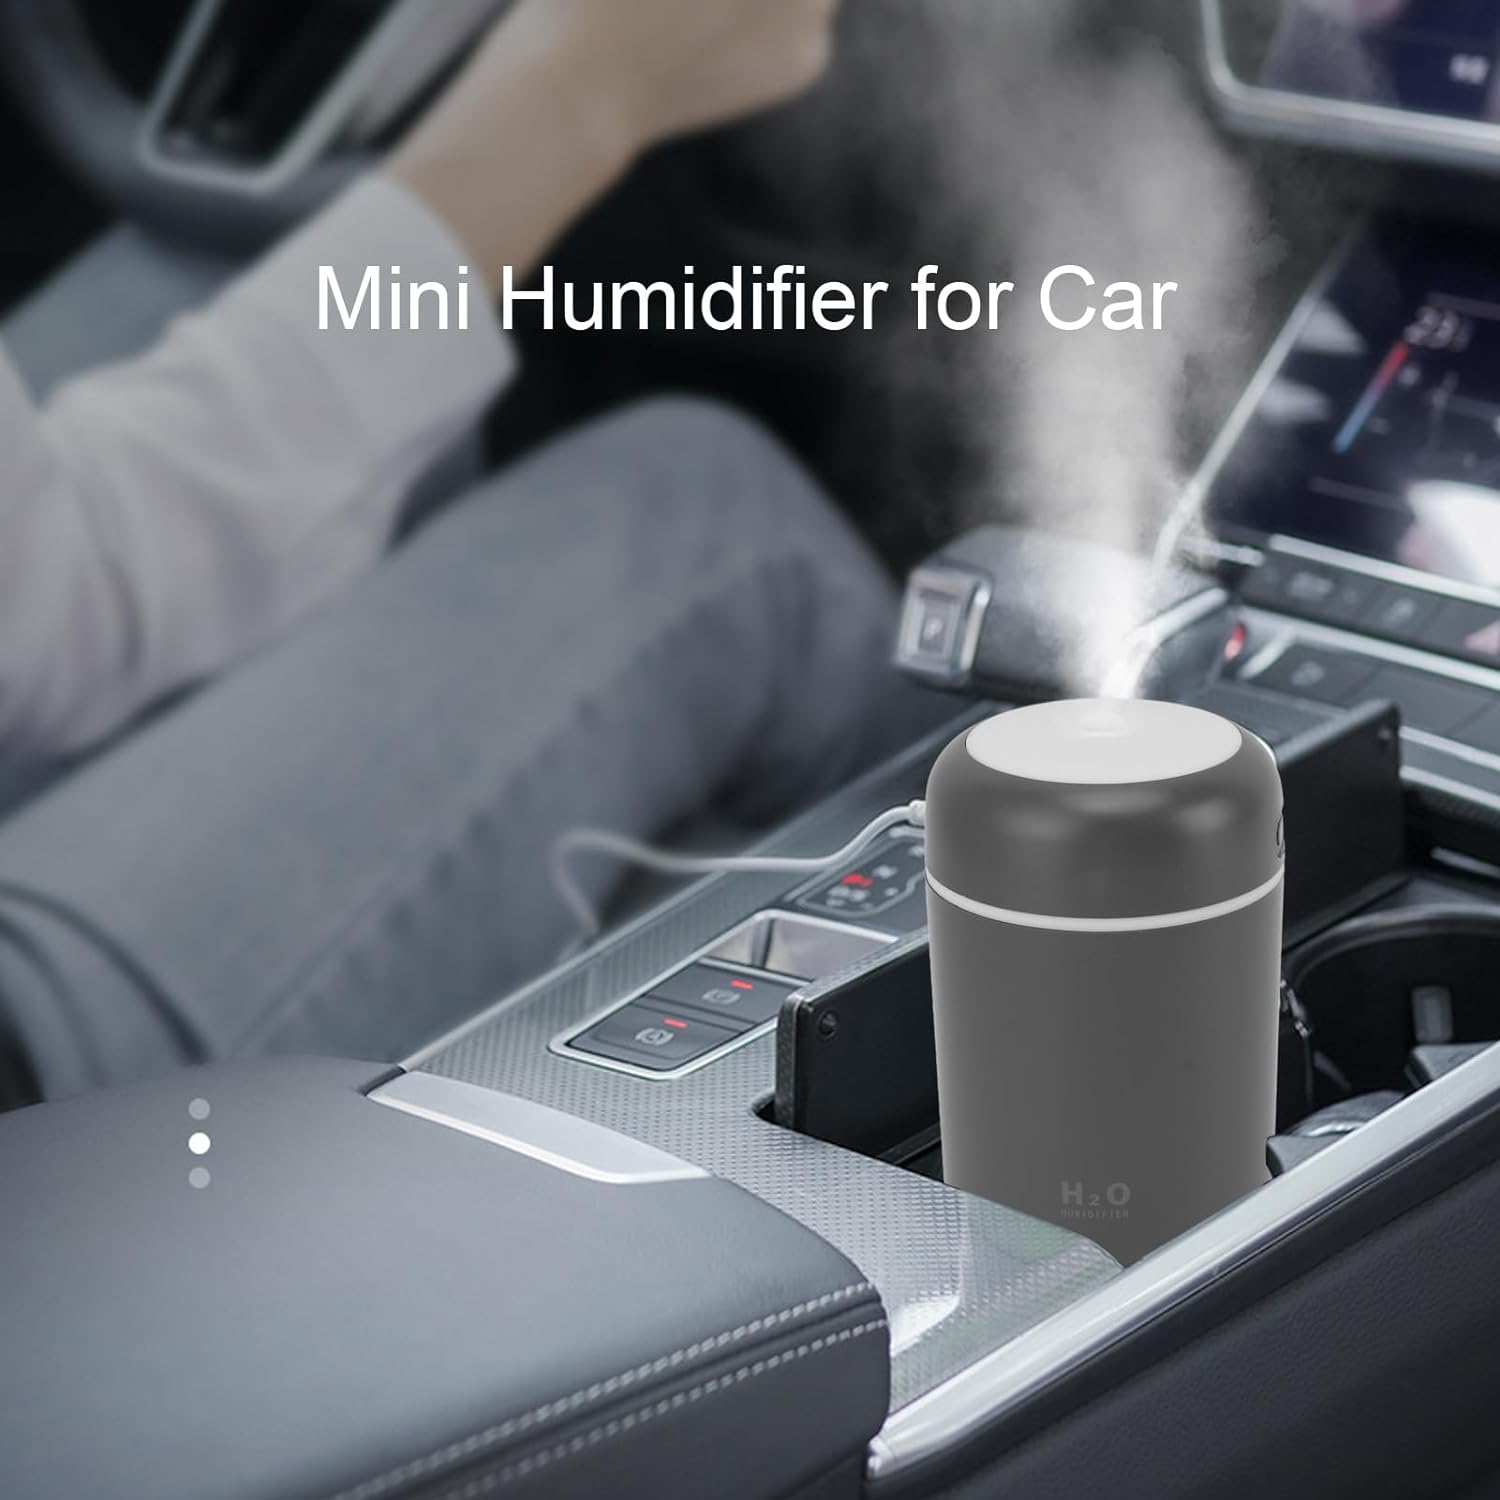 AYNEFY Humidifier for Car USB Air Freshener Diffuser for Mini Silent Cup Plug in Hydration with for Creative Car Air Freshener for Room Diffuser Whole House Humidifiers (Gray)